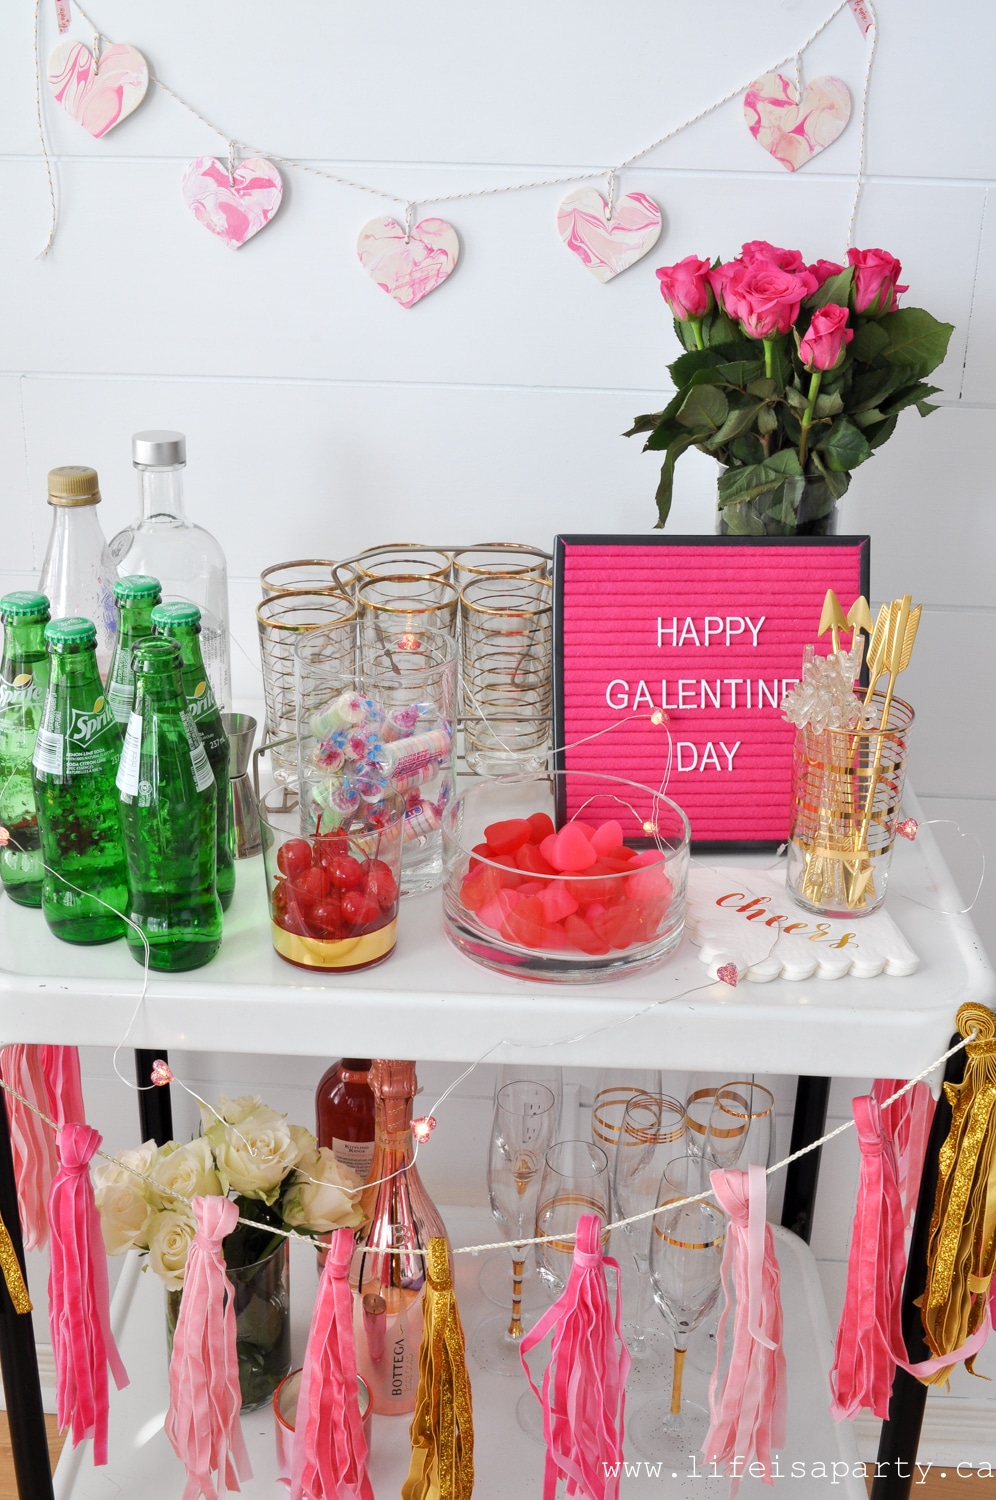 Bar Cart decorated in pink ready for Galentine's Day